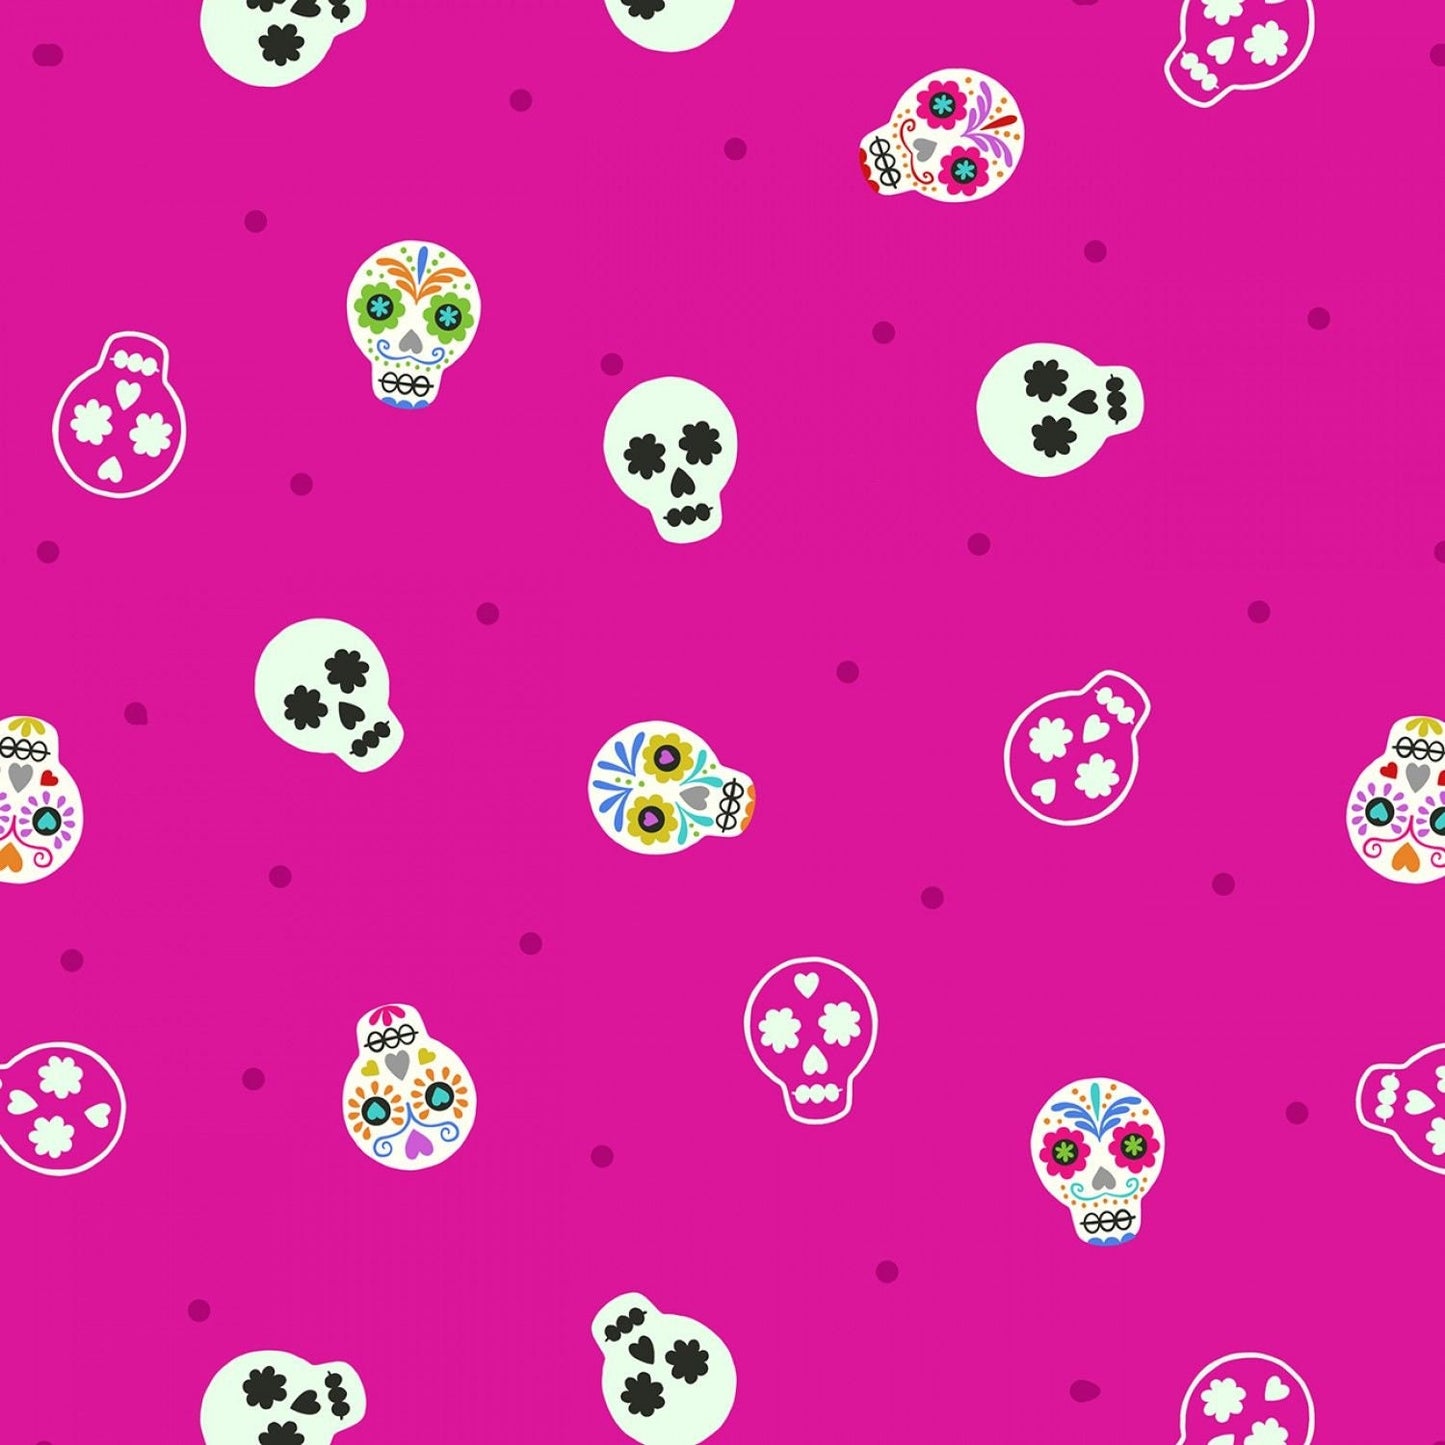 Small Things Glow Sugar Skulls on Bright Pink SM40-2 Glow in the Dark Cotton Woven Fabric